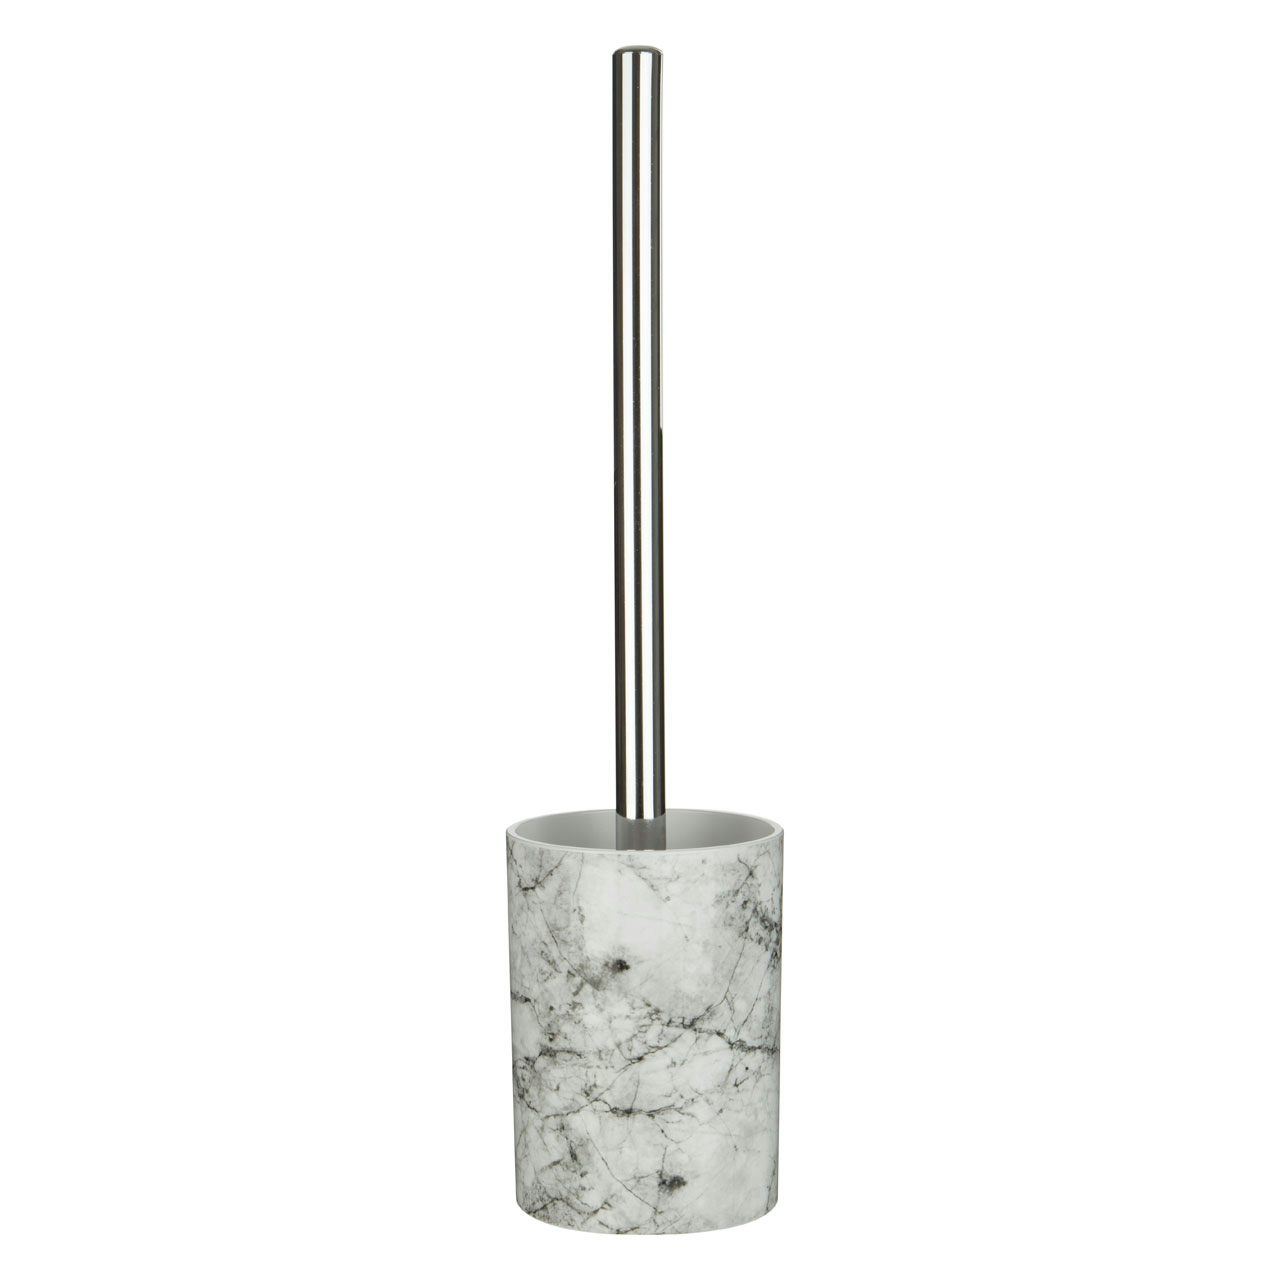 Accents Rome black and white marble effect toilet brush and holder